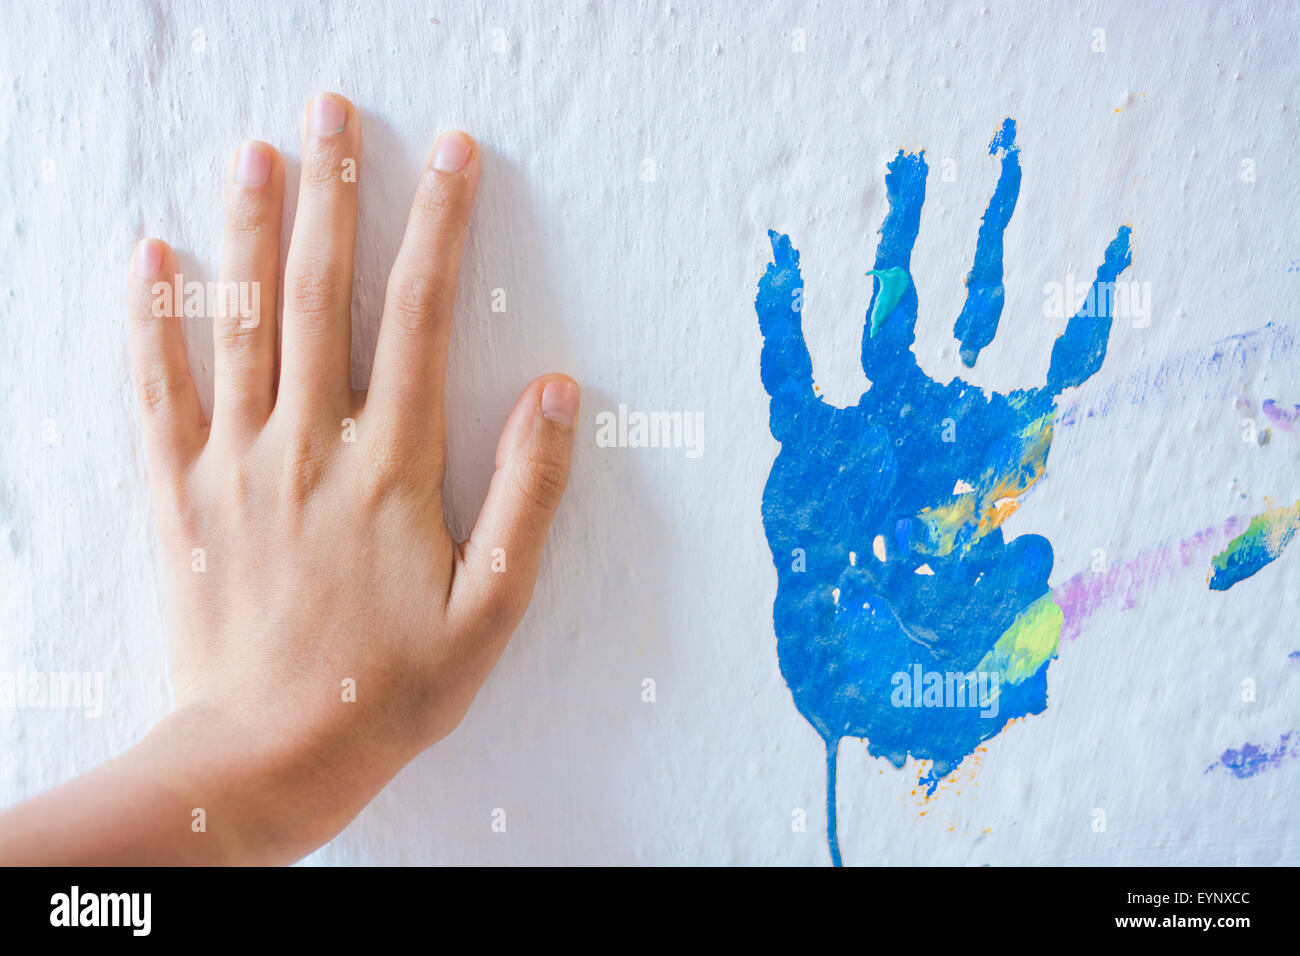 Painting wall with hands Stock Photo